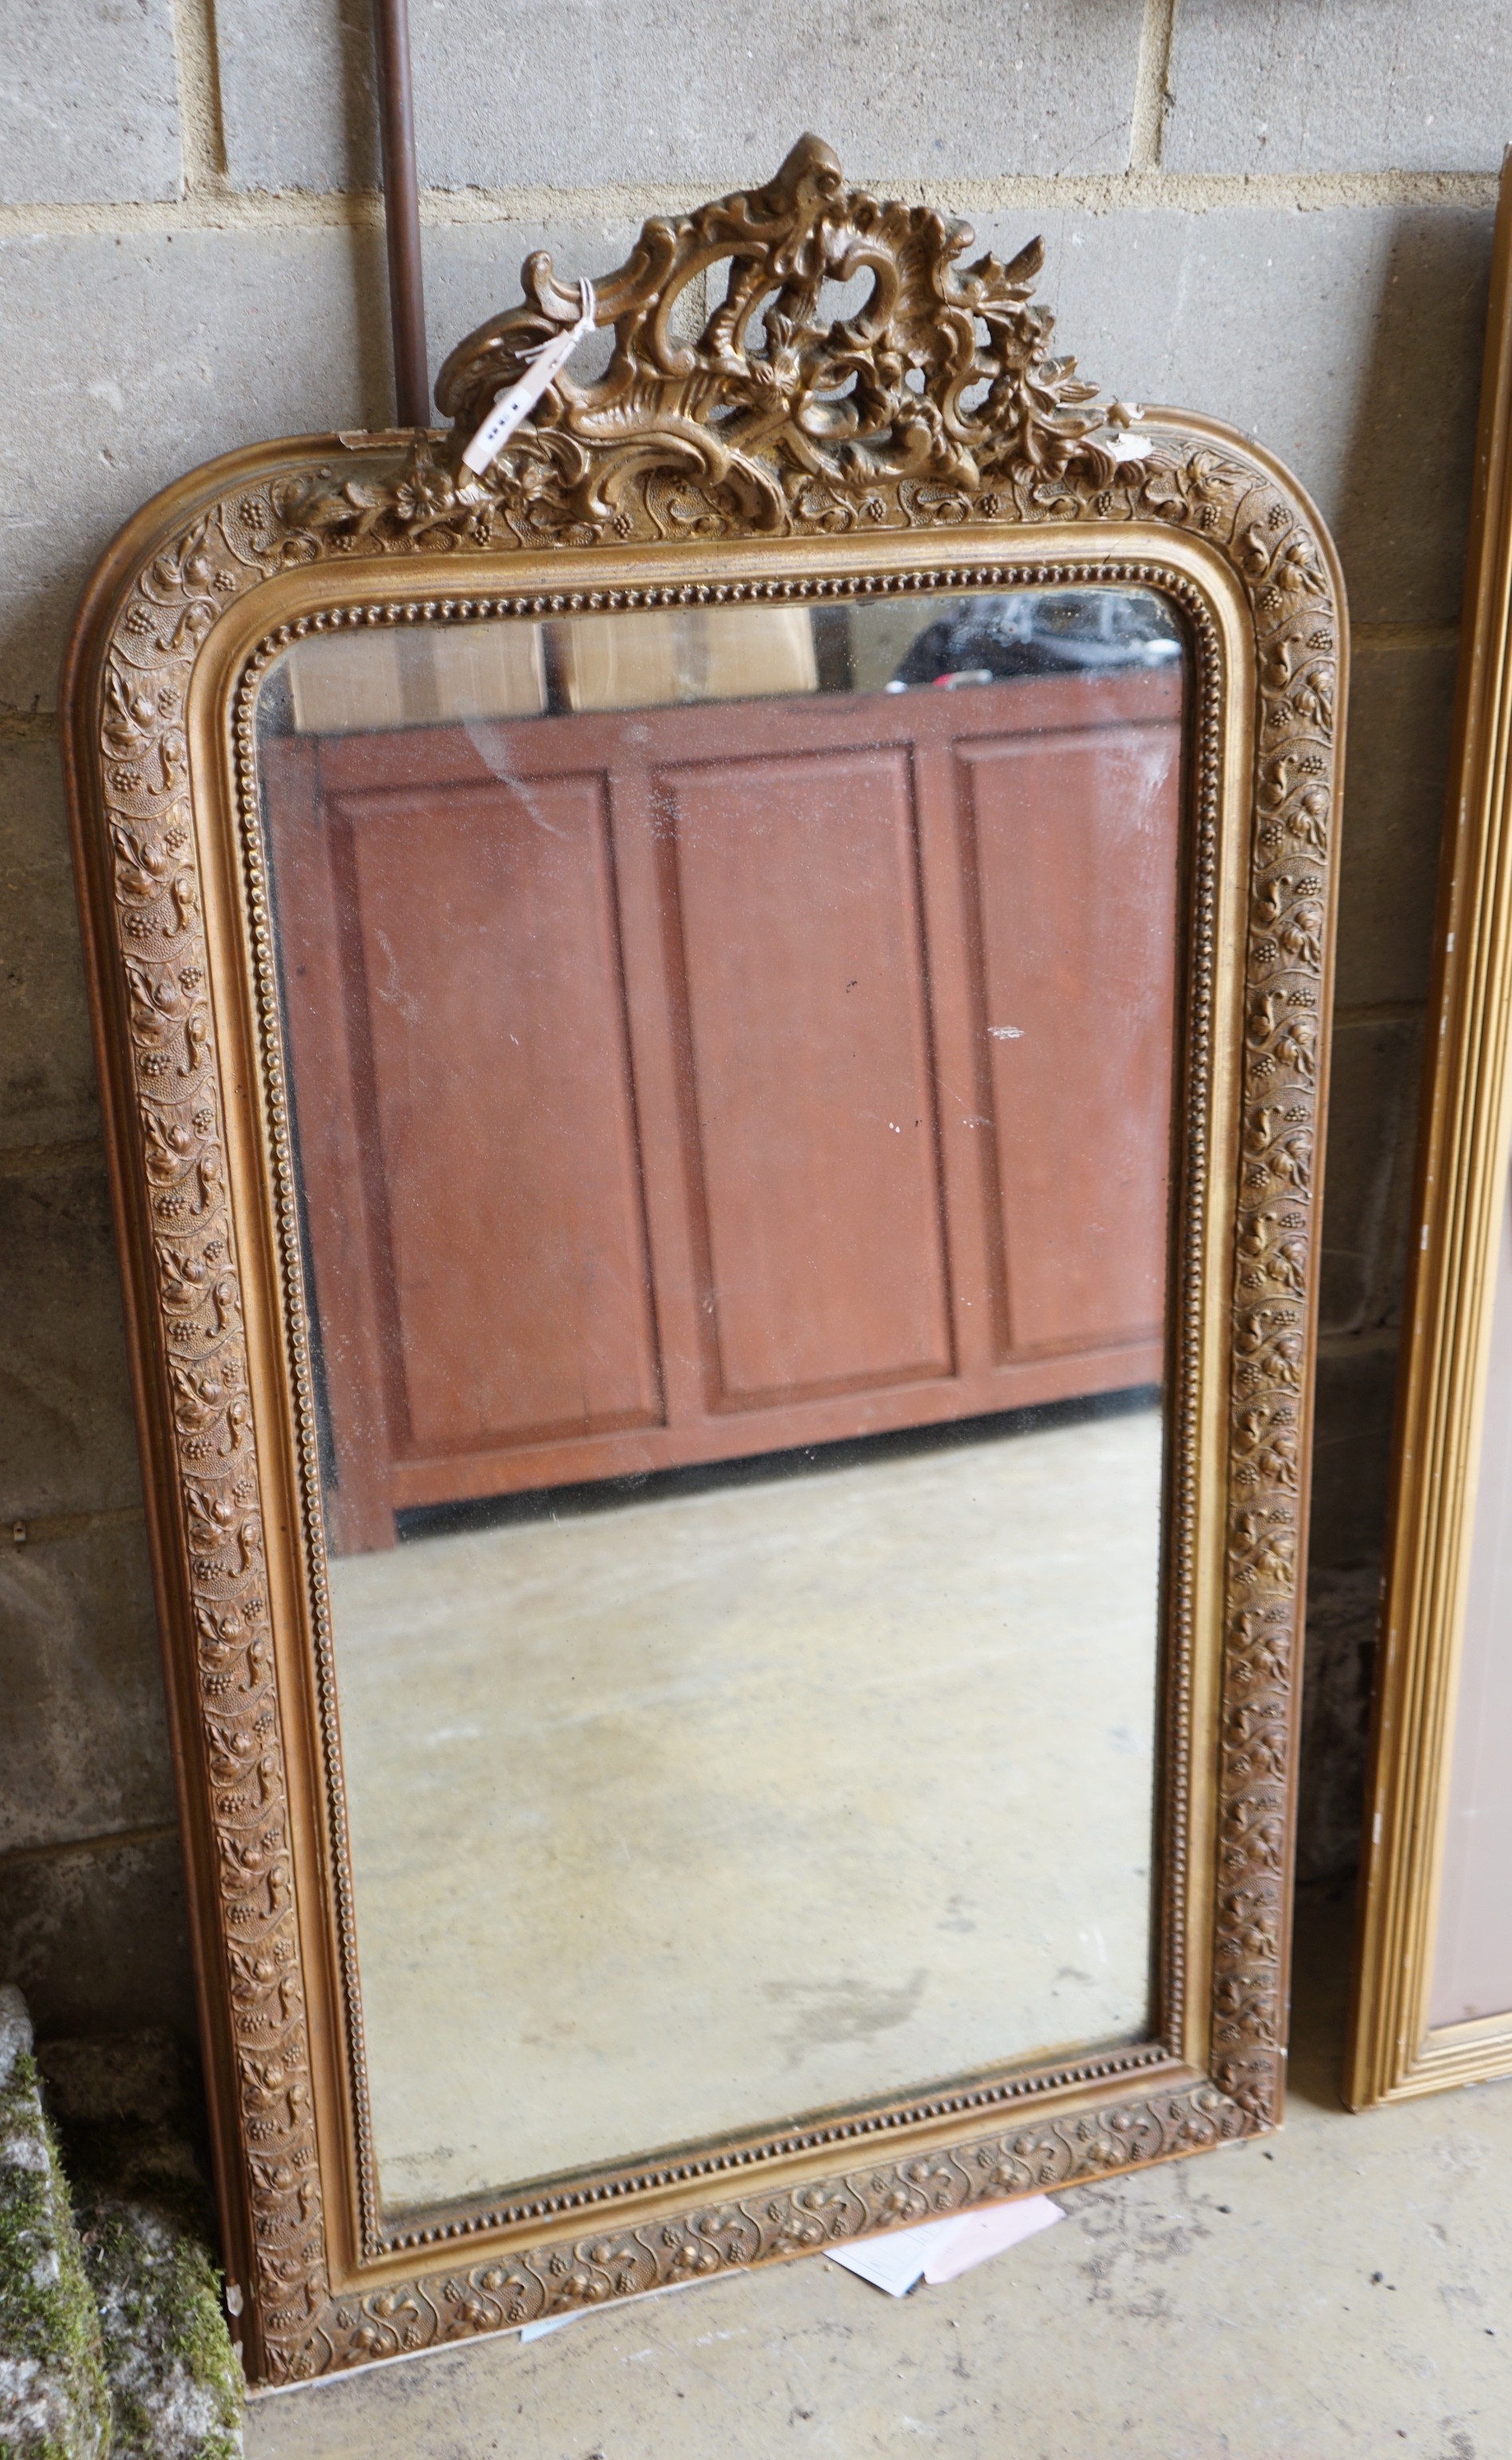 A 19th century French giltwood and gesso wall mirror (repainted), width 66cm, height 119cm                                                                                                                                  